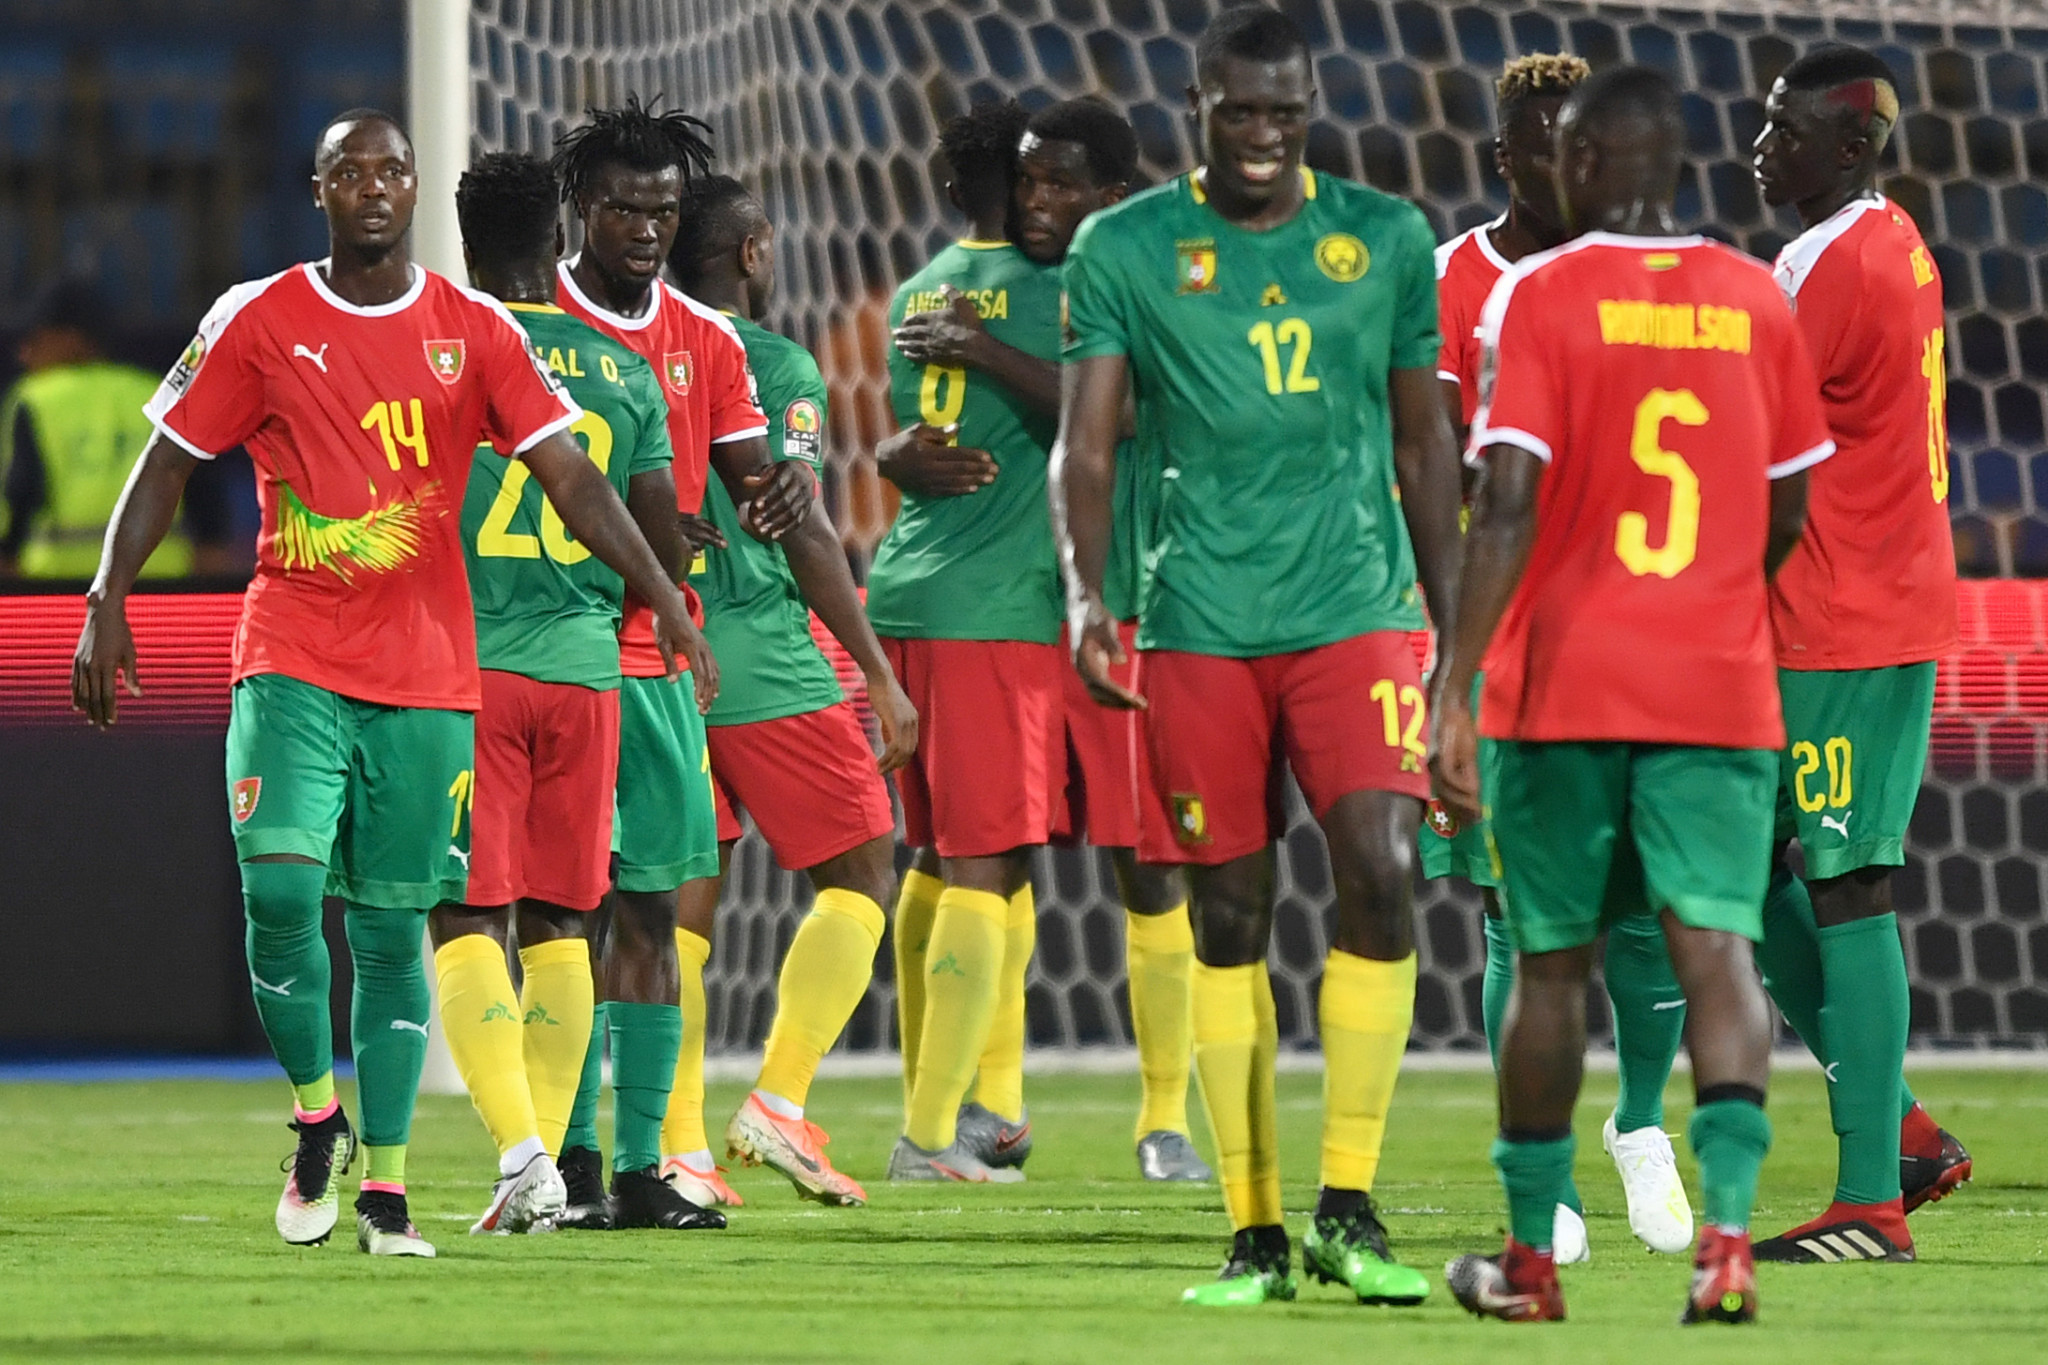 Cameroon and Benin both through to last-16 at Africa Cup of Nations after goalless draw